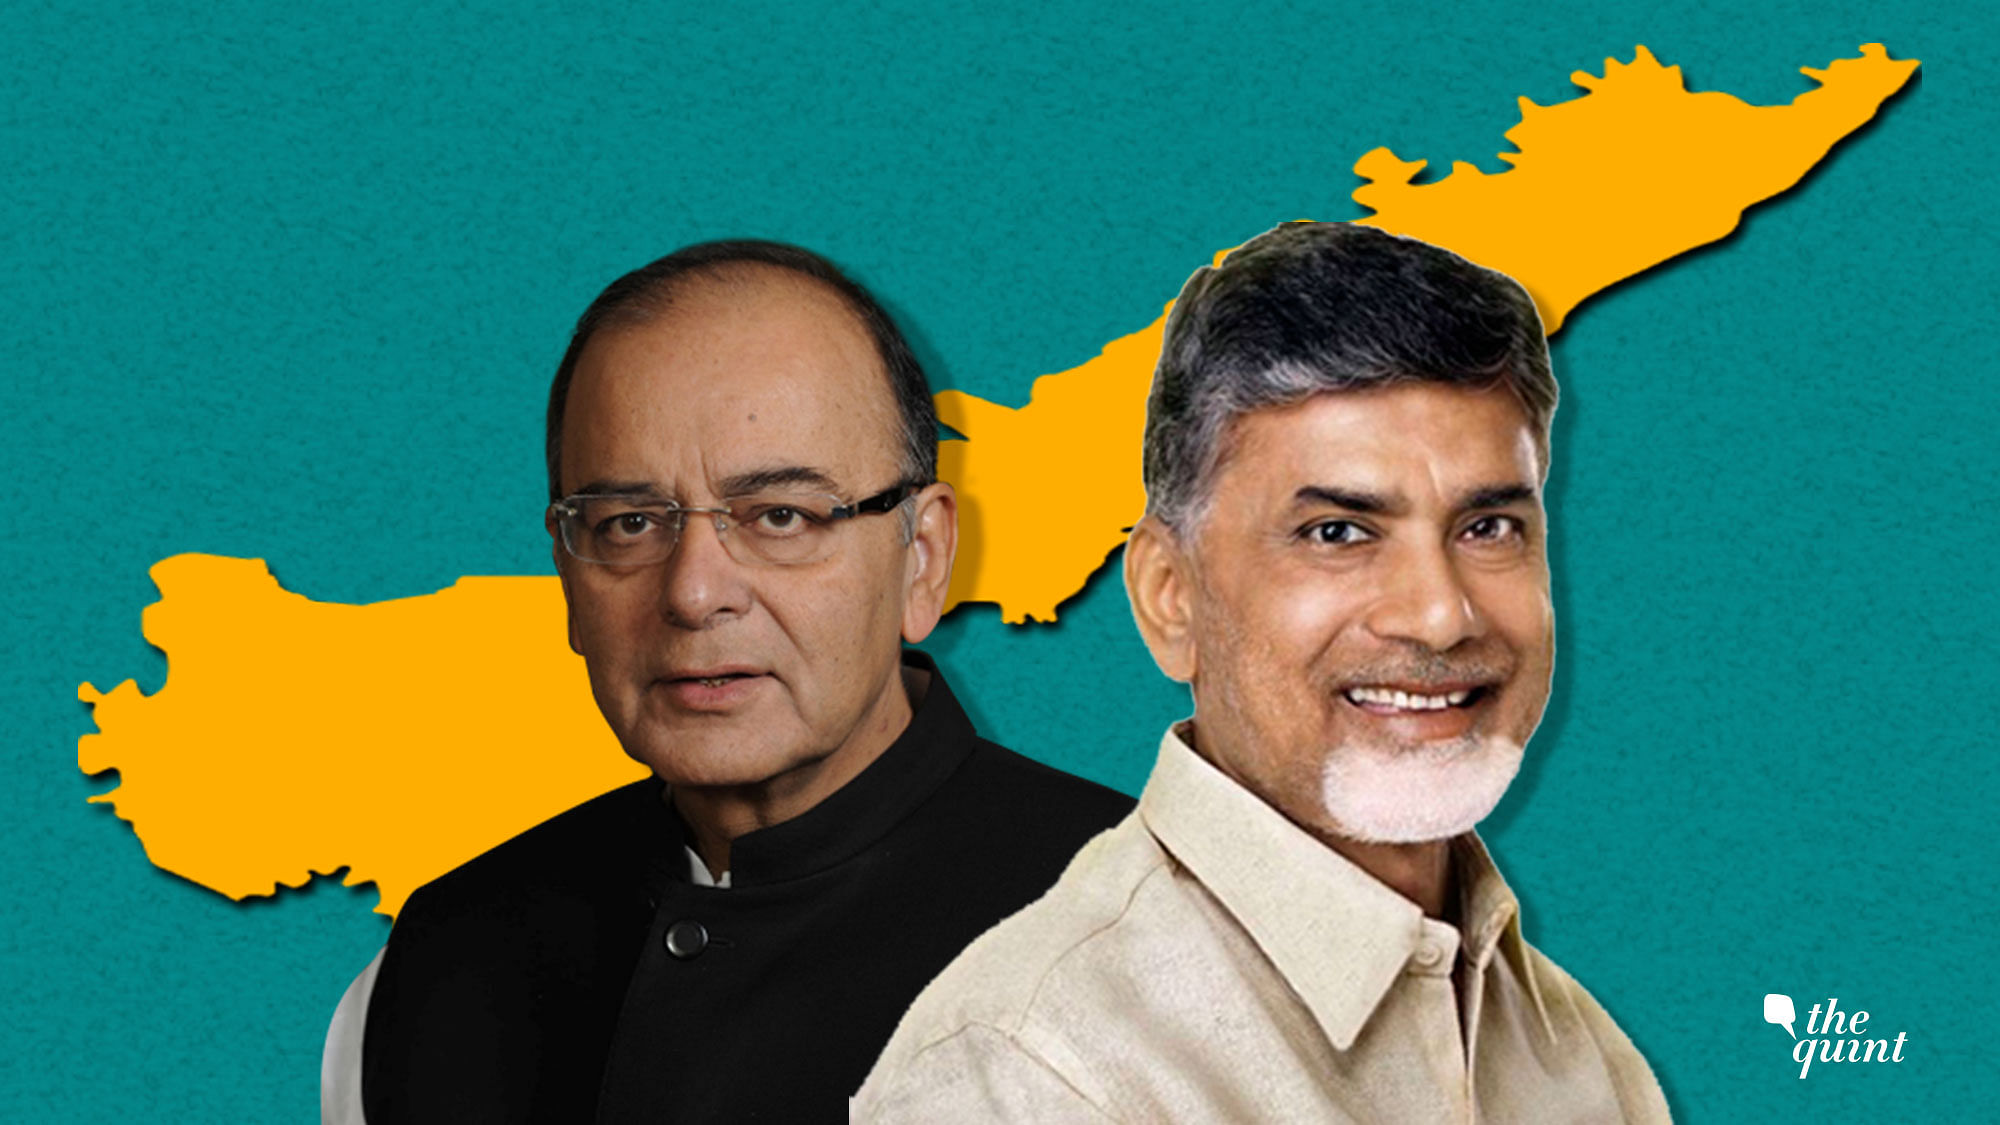 Cracks were reported in the TDP-NDA alliance after Arun Jaitley ruled out a special category status for Andhra Pradesh, offering a special package to the state instead.